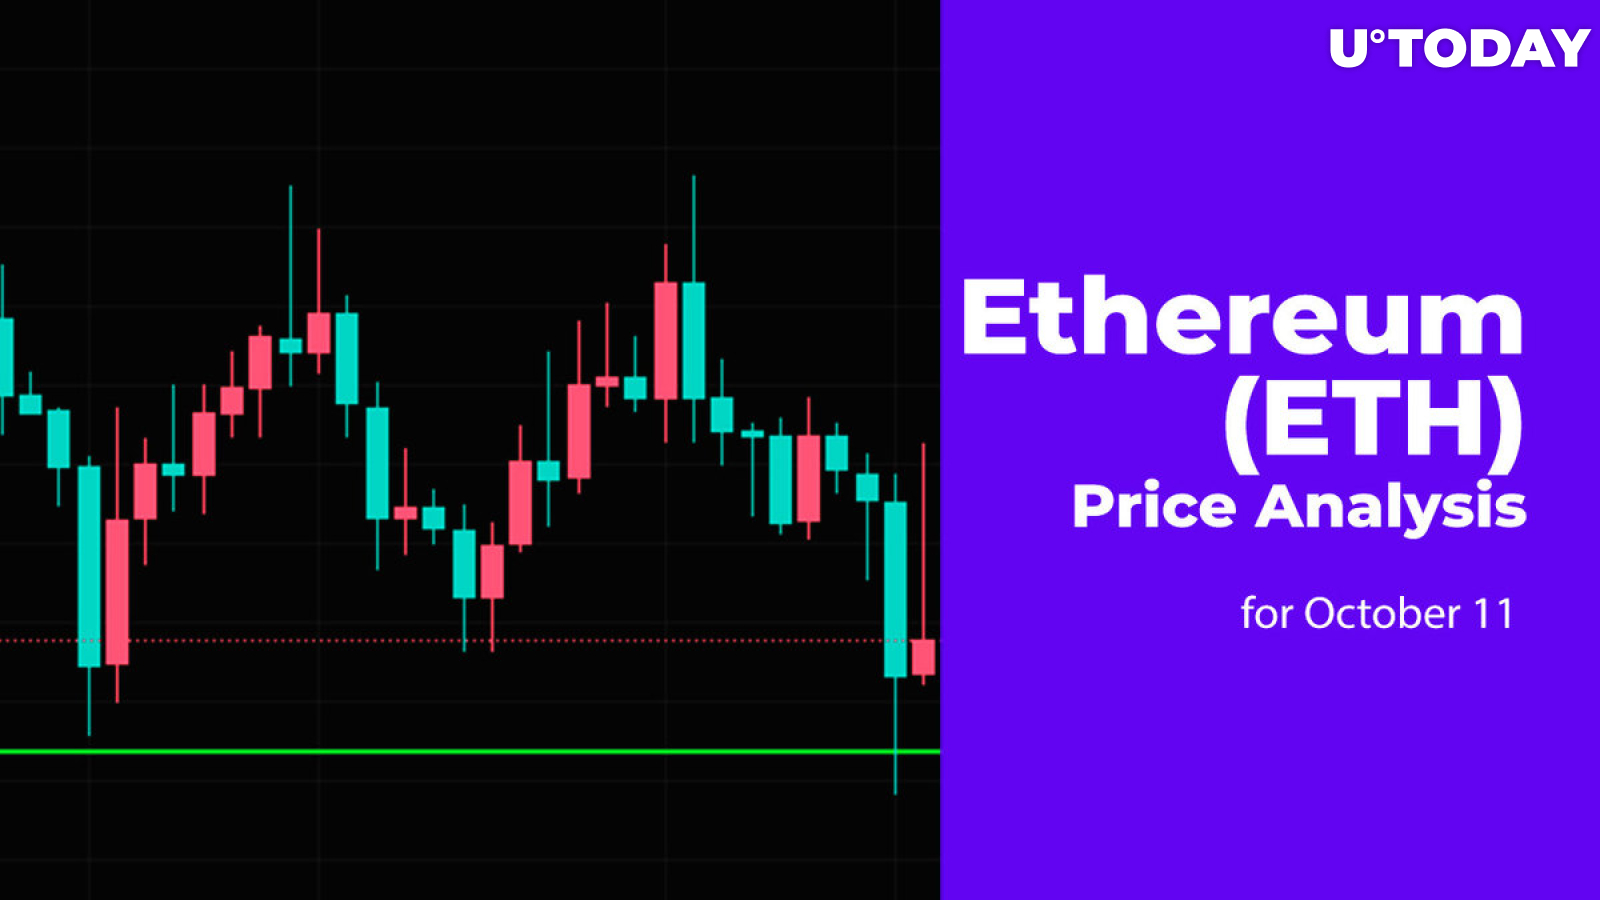 Ethereum (ETH) Price Analysis for October 11